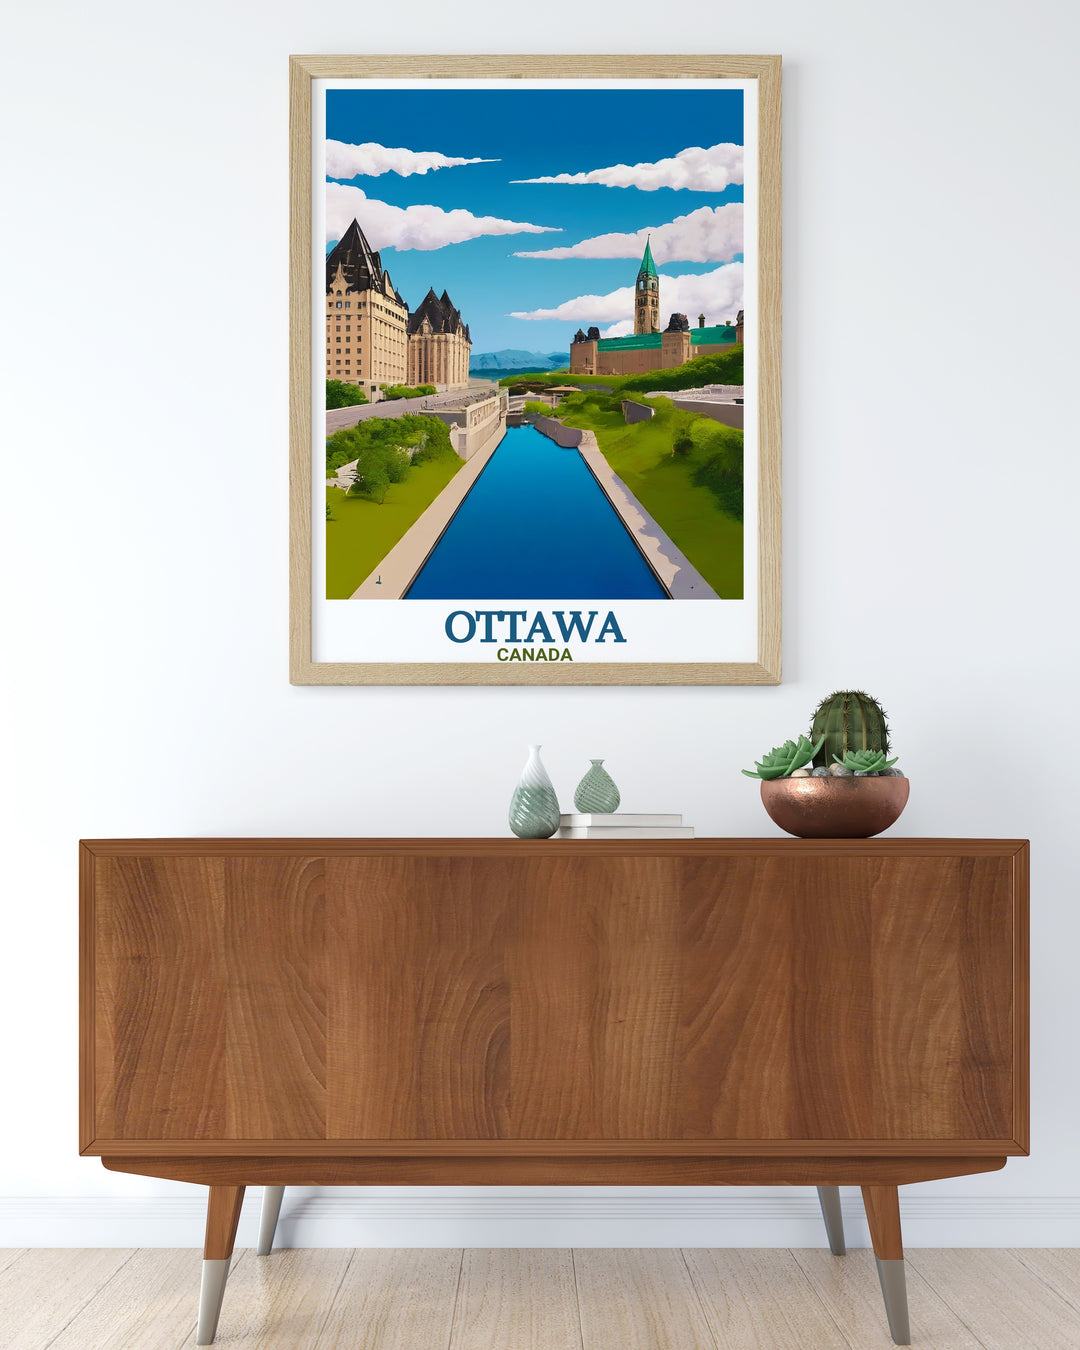 Ottawa Wall Art featuring Rideau Canal and other city landmarks. Perfect for those who love Ottawa travel this artwork offers a captivating view of the citys most famous sites bringing Ottawas charm into your living space.